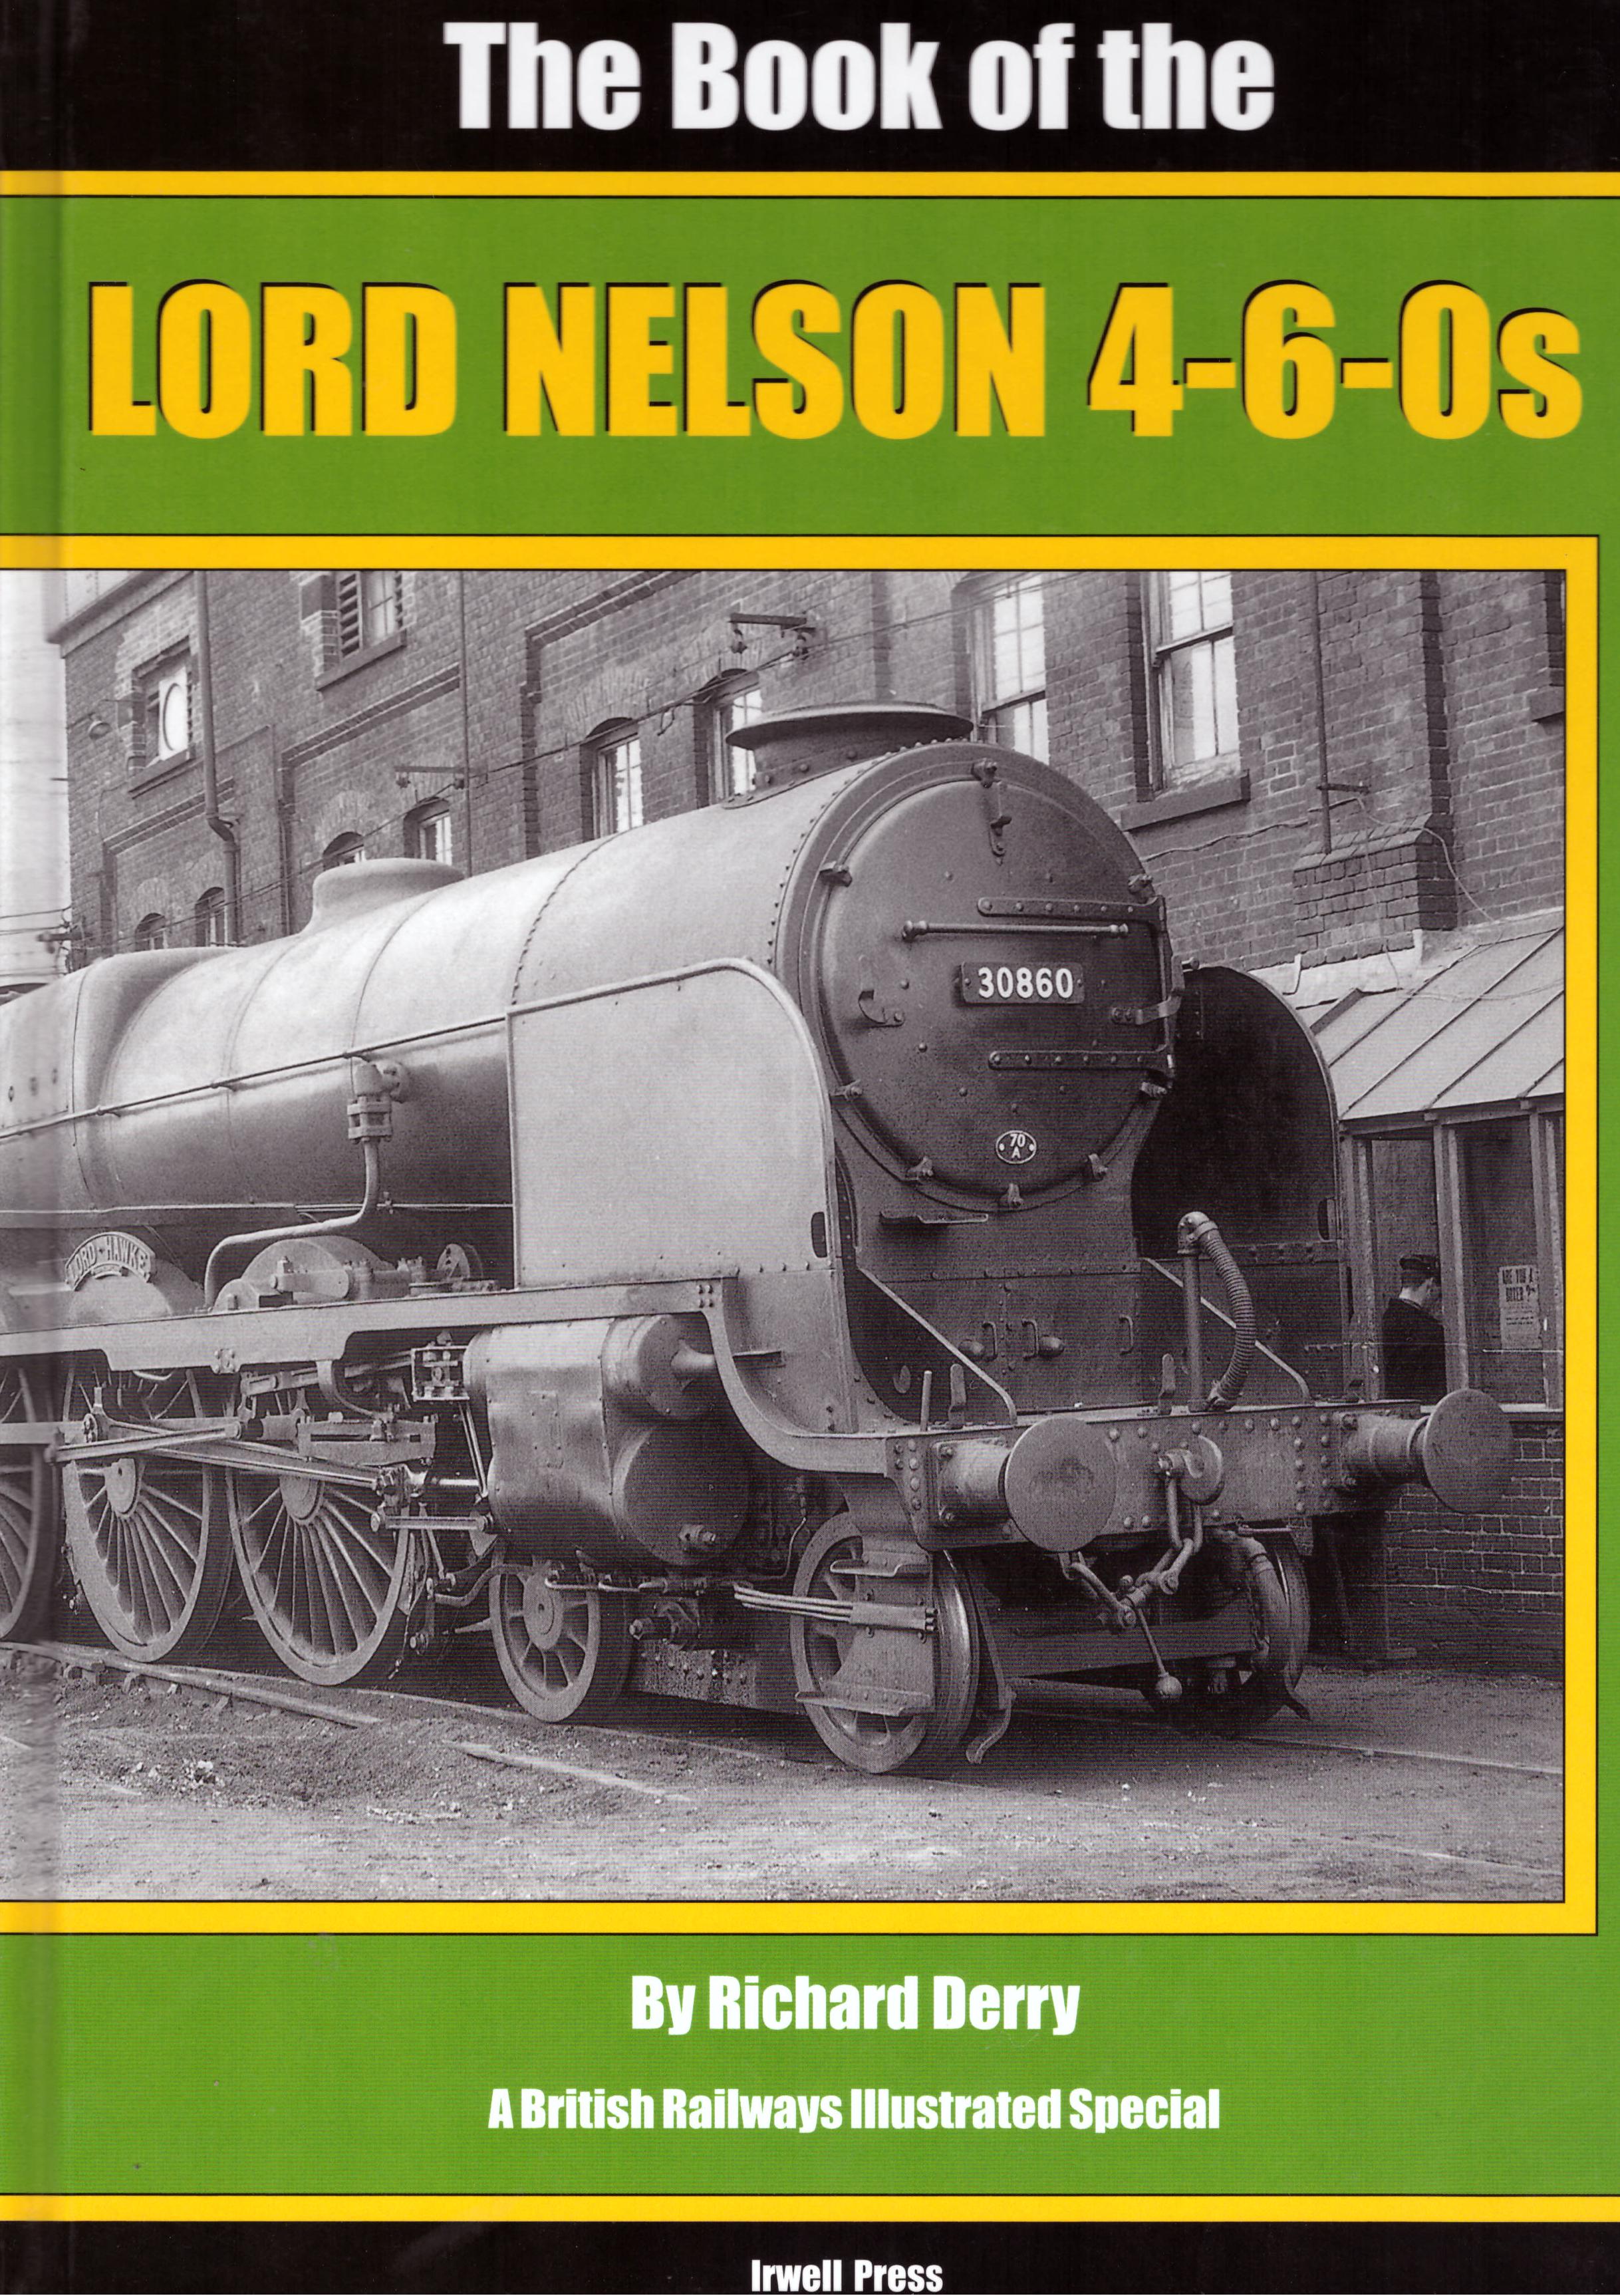 The Book Lord Nelson 4-6-0s